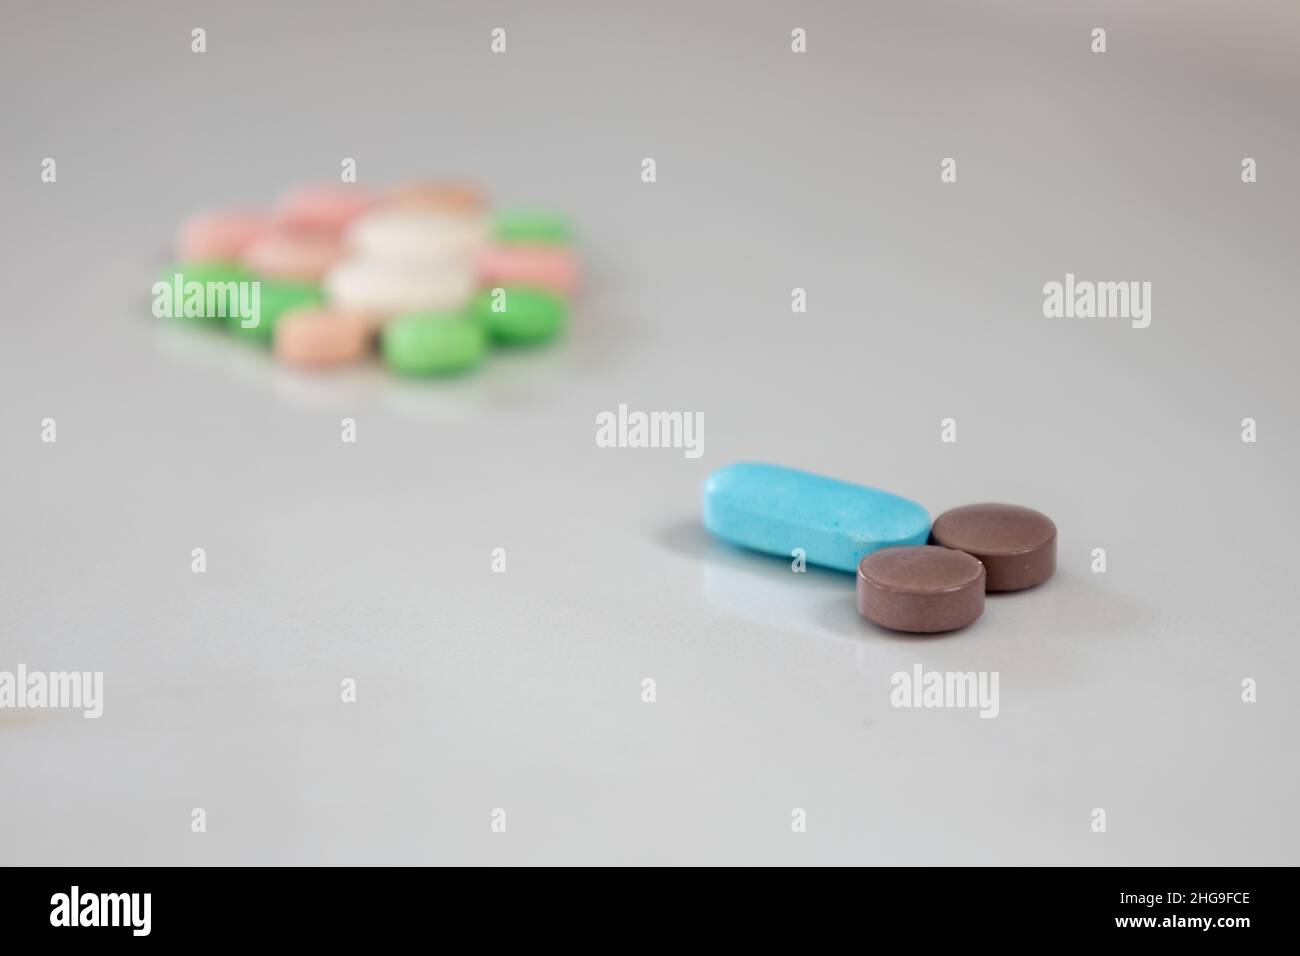 Colored pills simulating male genitalia reaching an egg. Selective focus. Fertility concept. Stock Photo